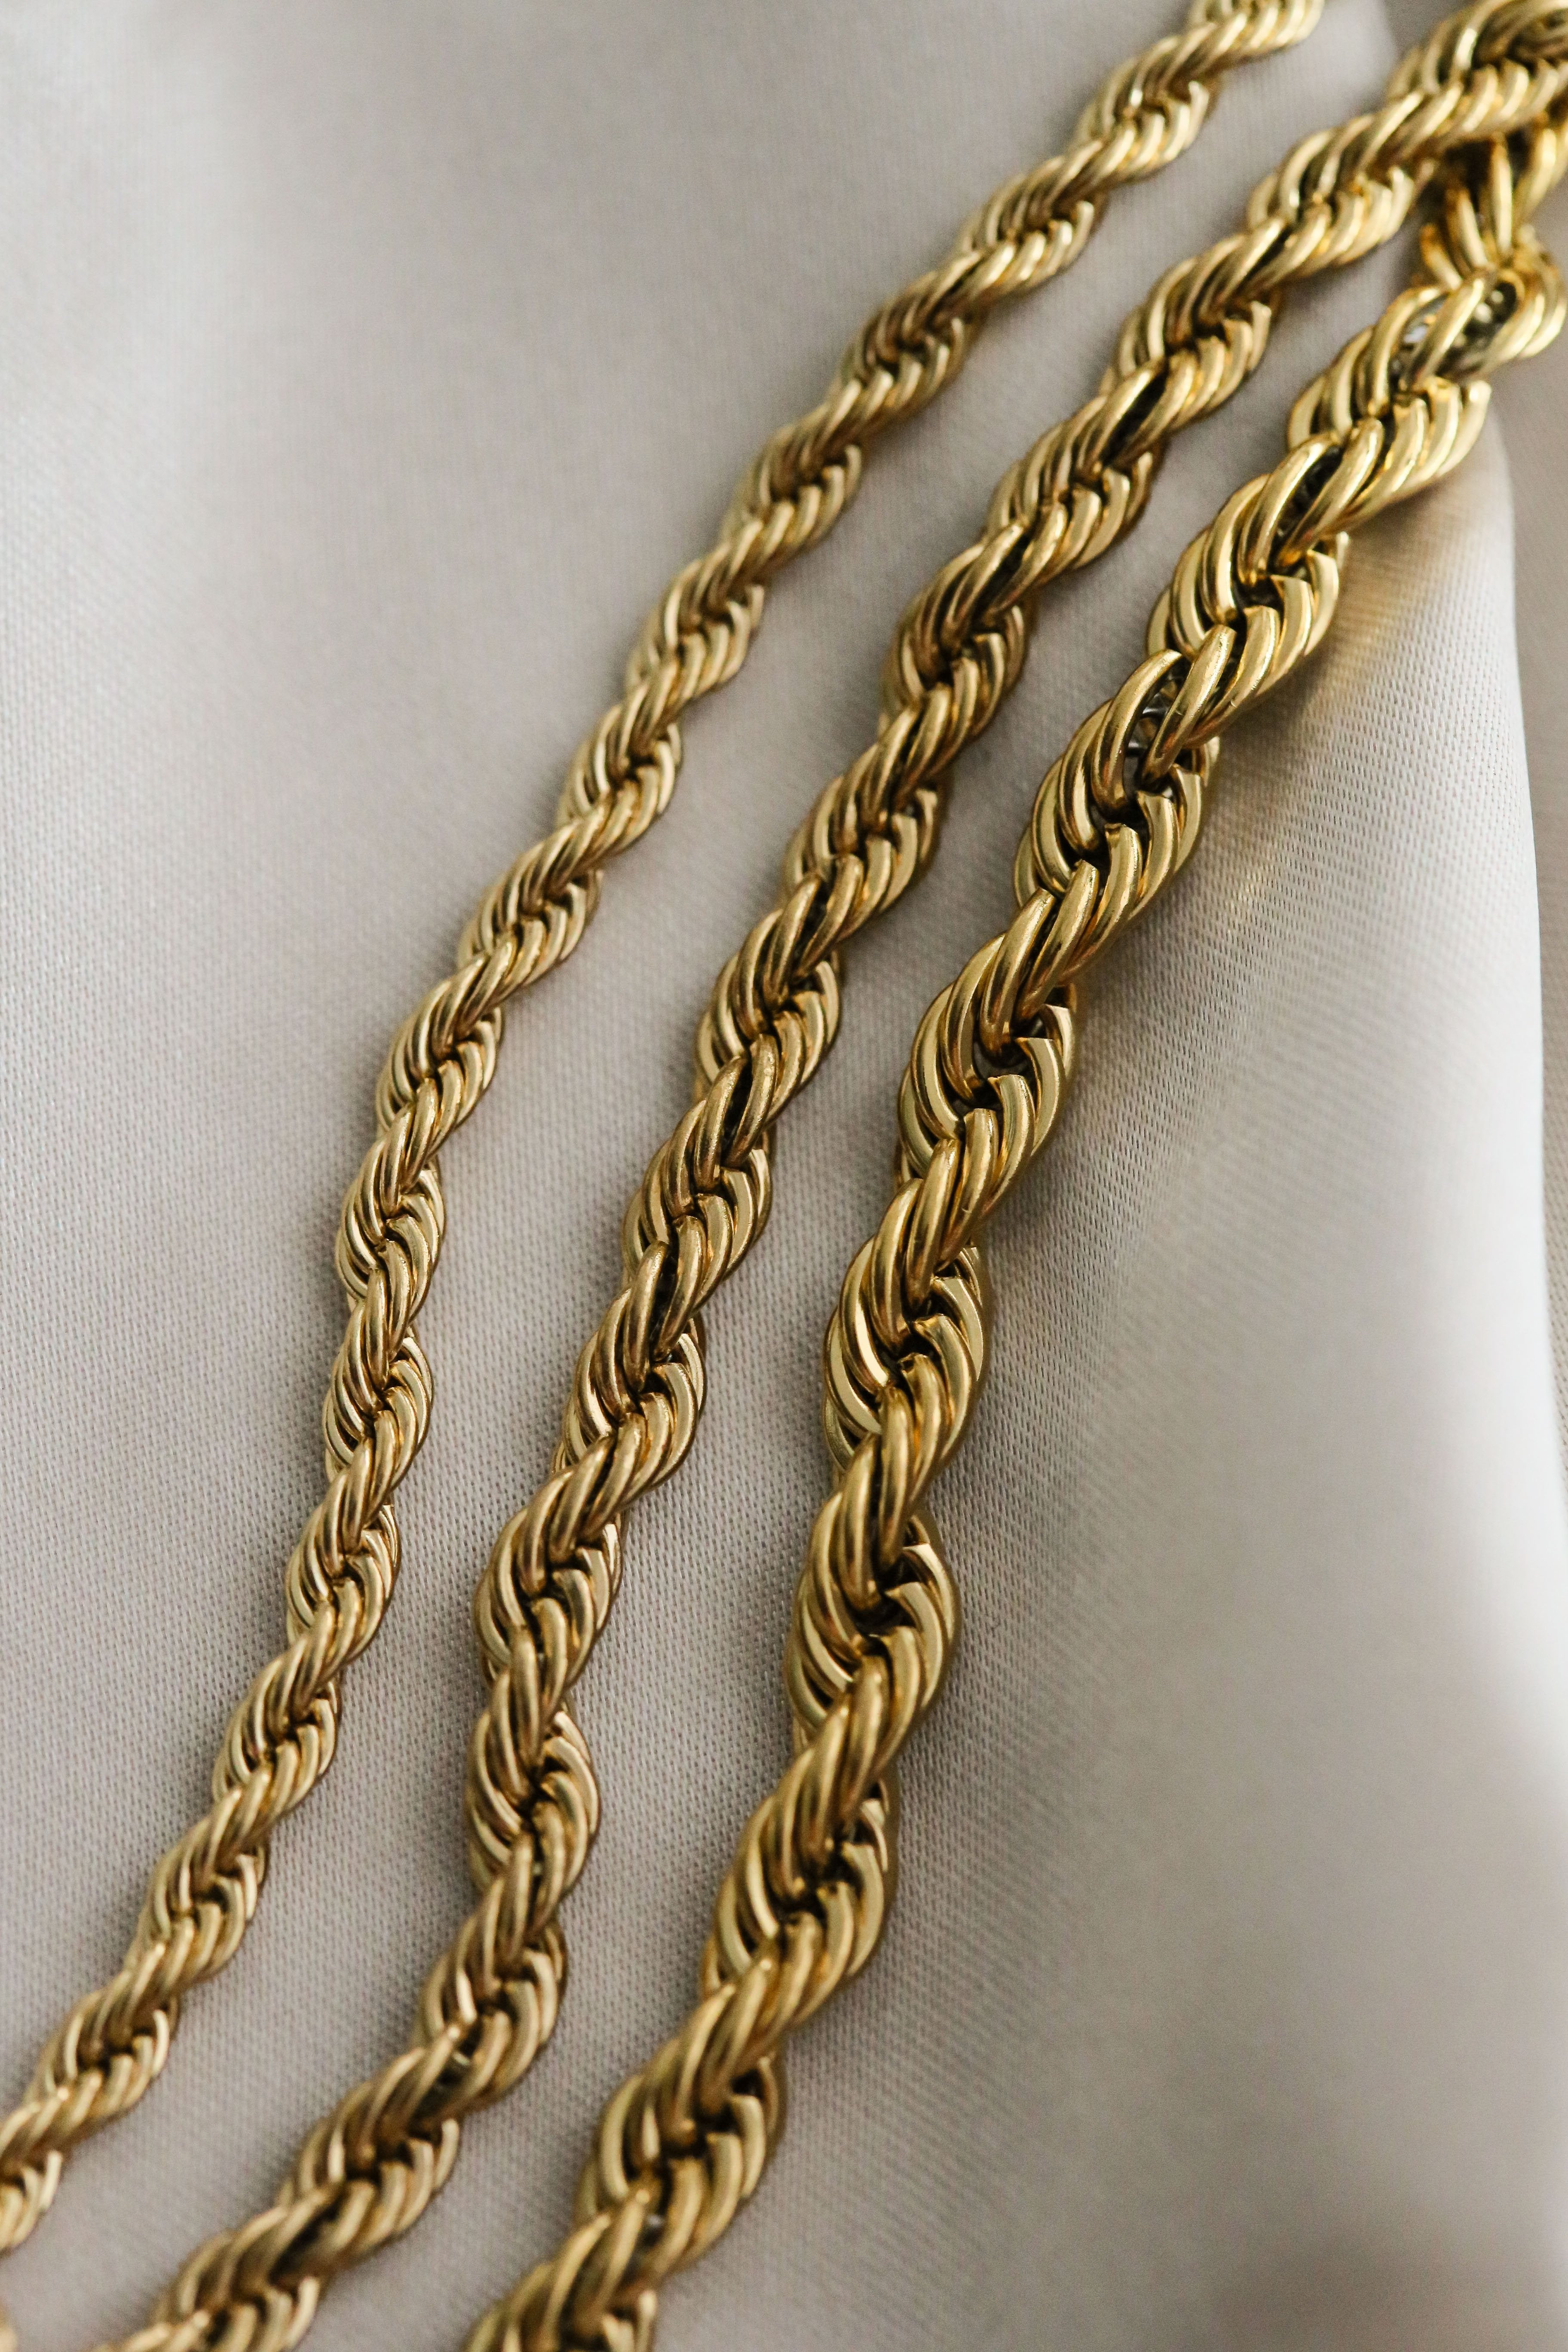 Lola Necklace - Boutique Minimaliste has waterproof, durable, elegant and vintage inspired jewelry